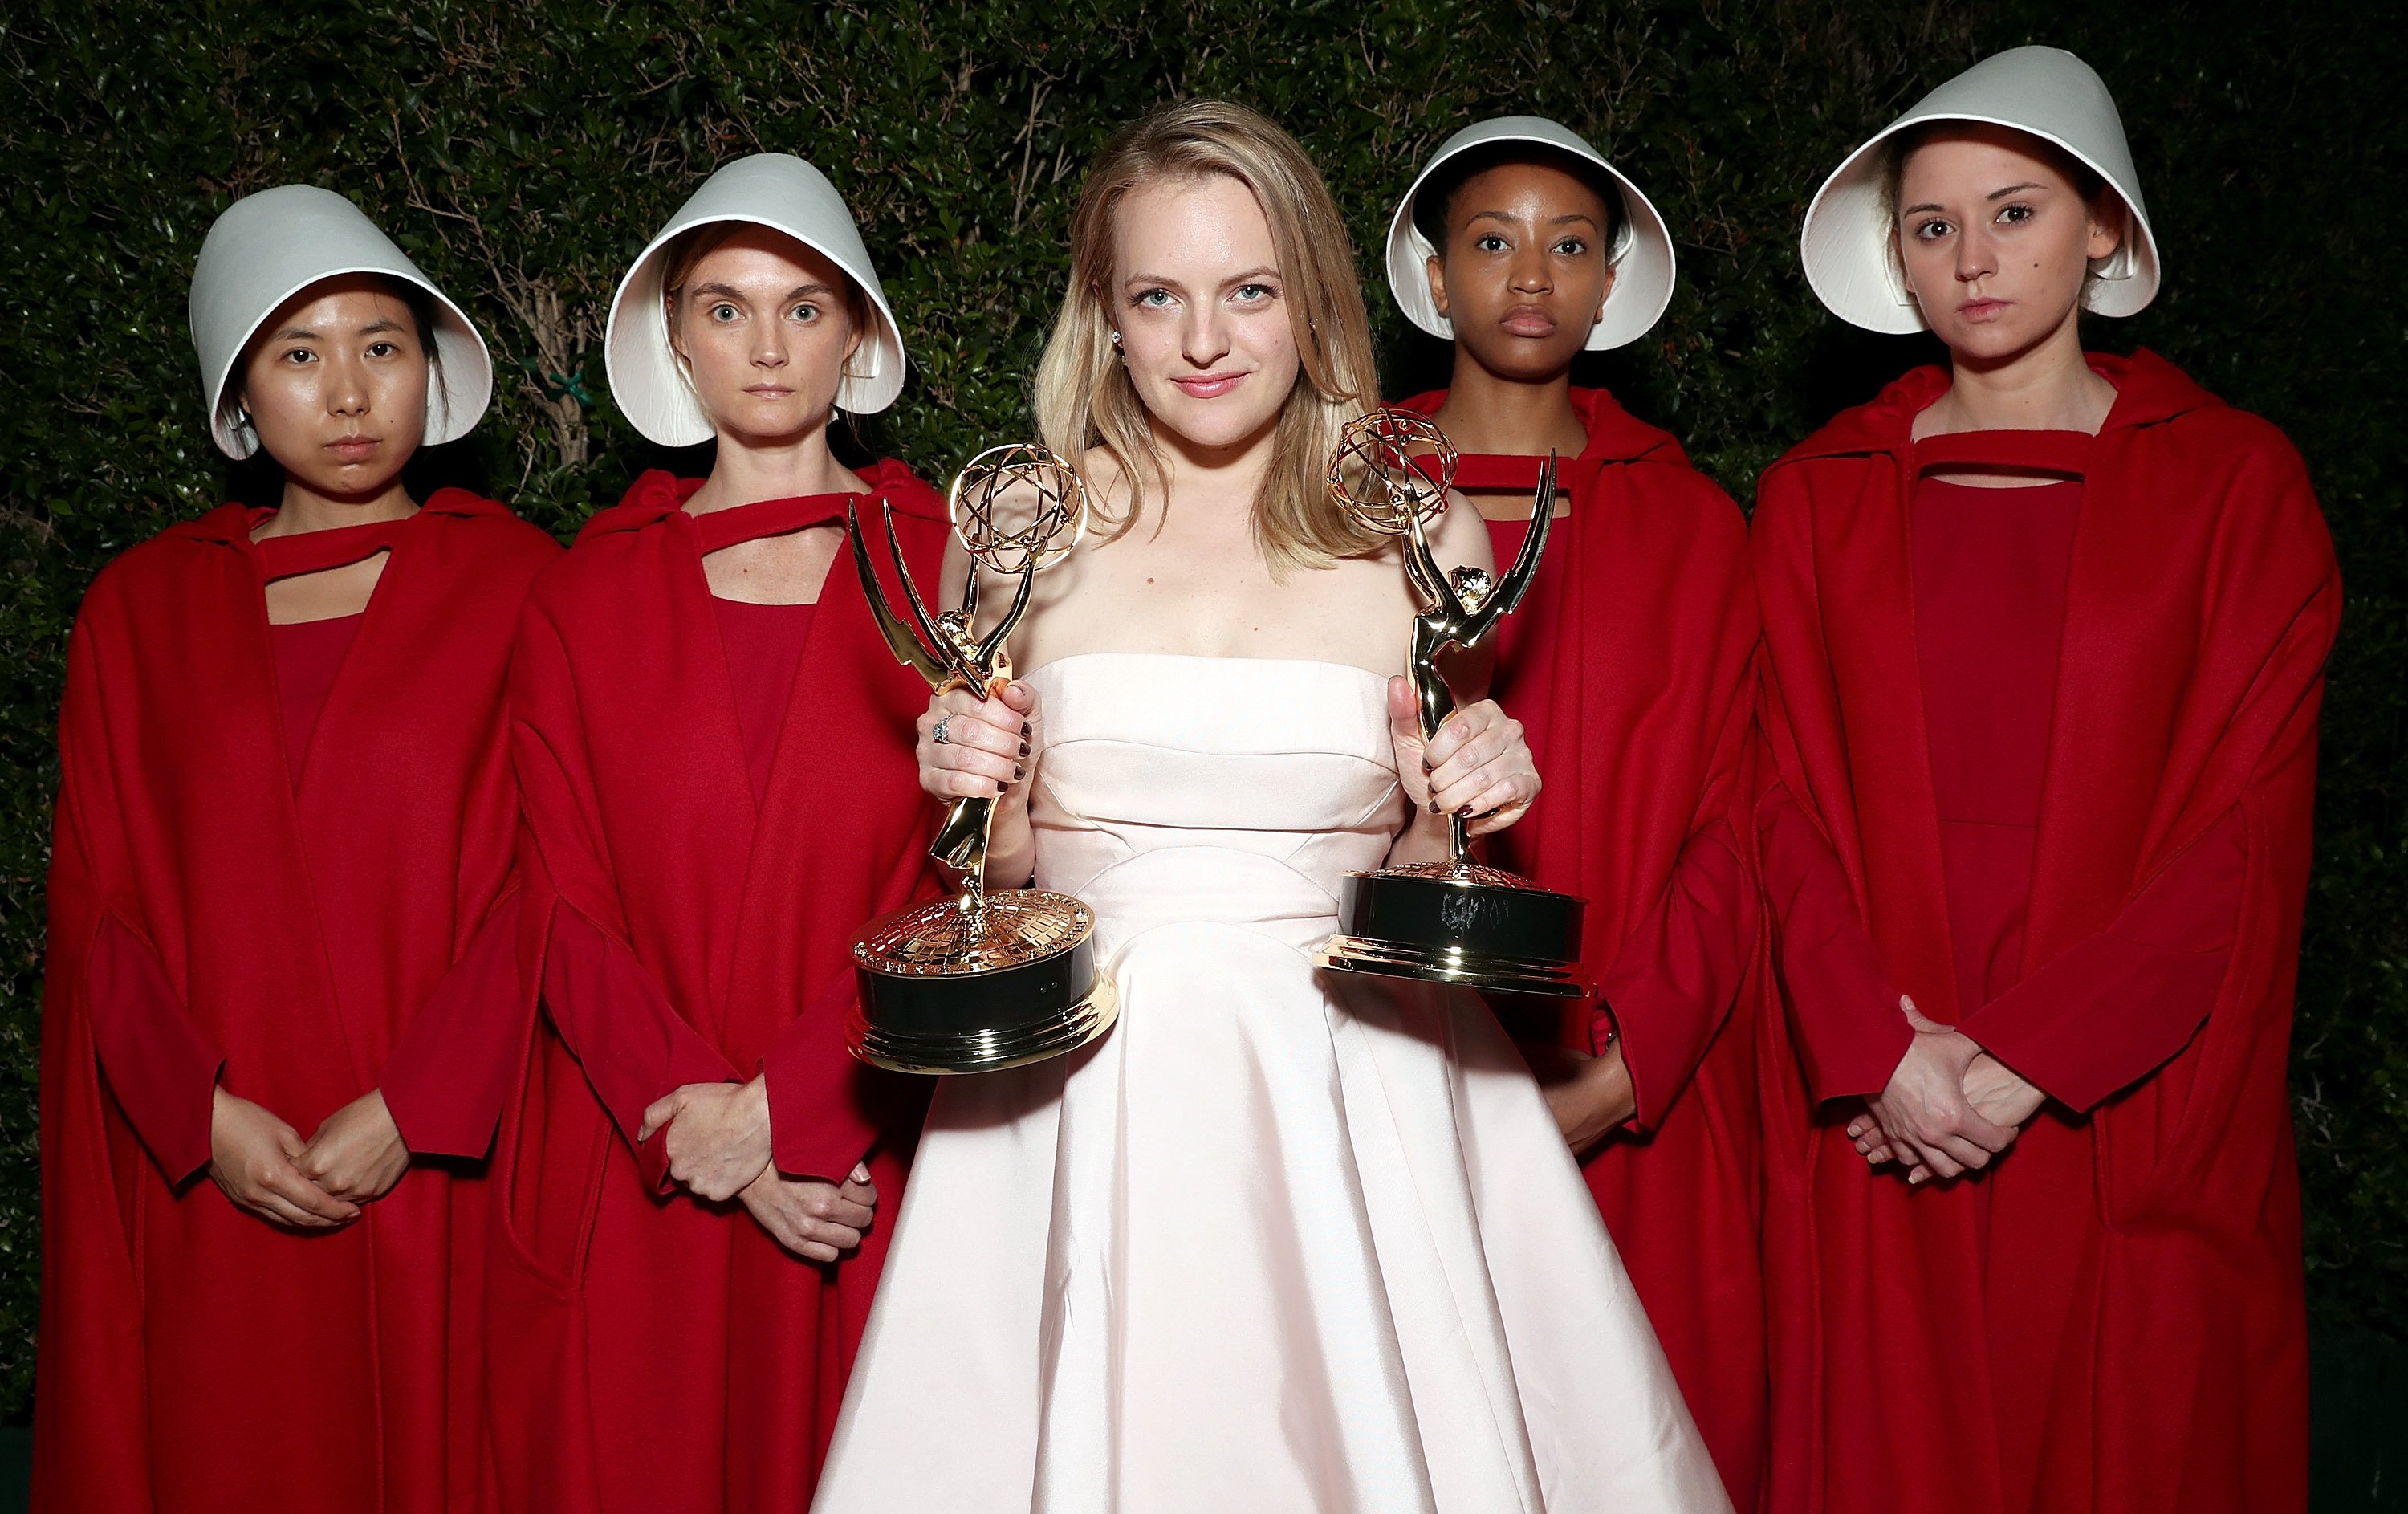 ‘The Handmaid’s Tale’ Author Said Why Offred’s Real Name Wasn’t in the Book